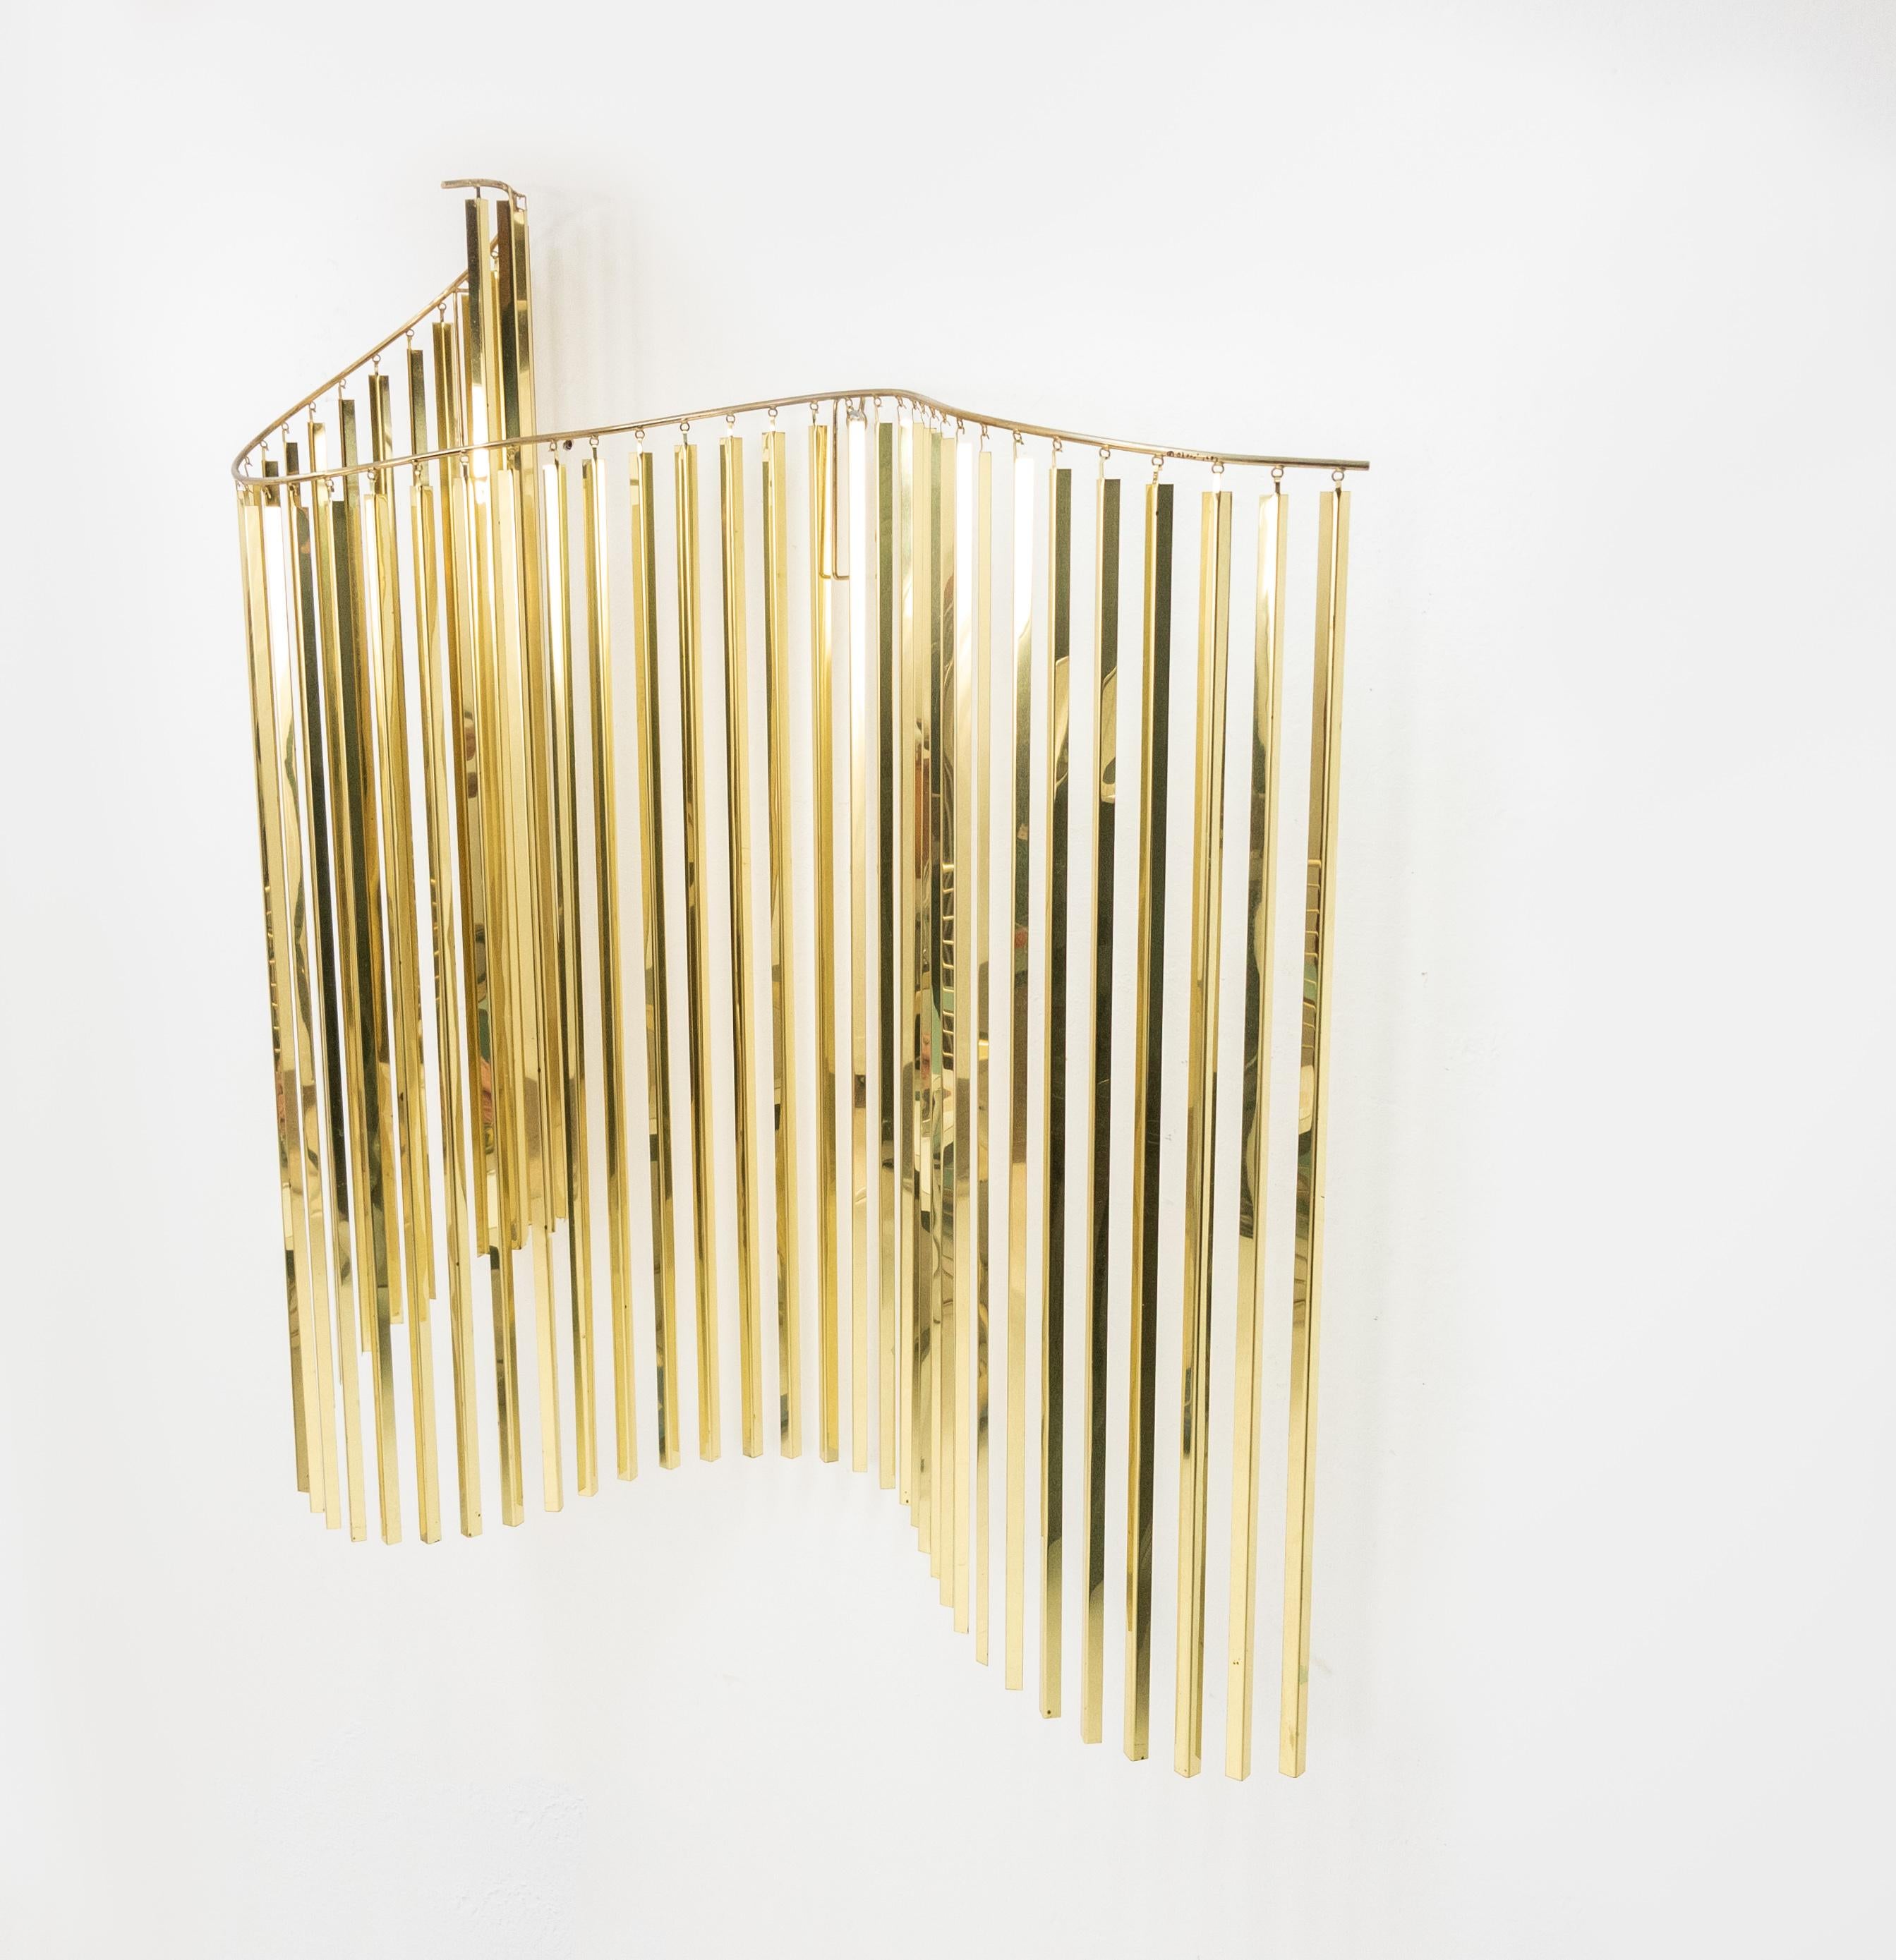 Large-scale brass C. Jeré for Artisan House. Wave like sculpture. It is made up of 44 V-shaped reflective brass strips that dangle from the curved hanging rod resembling a wave in motion. There are two wall mounts on the hanging rod that will